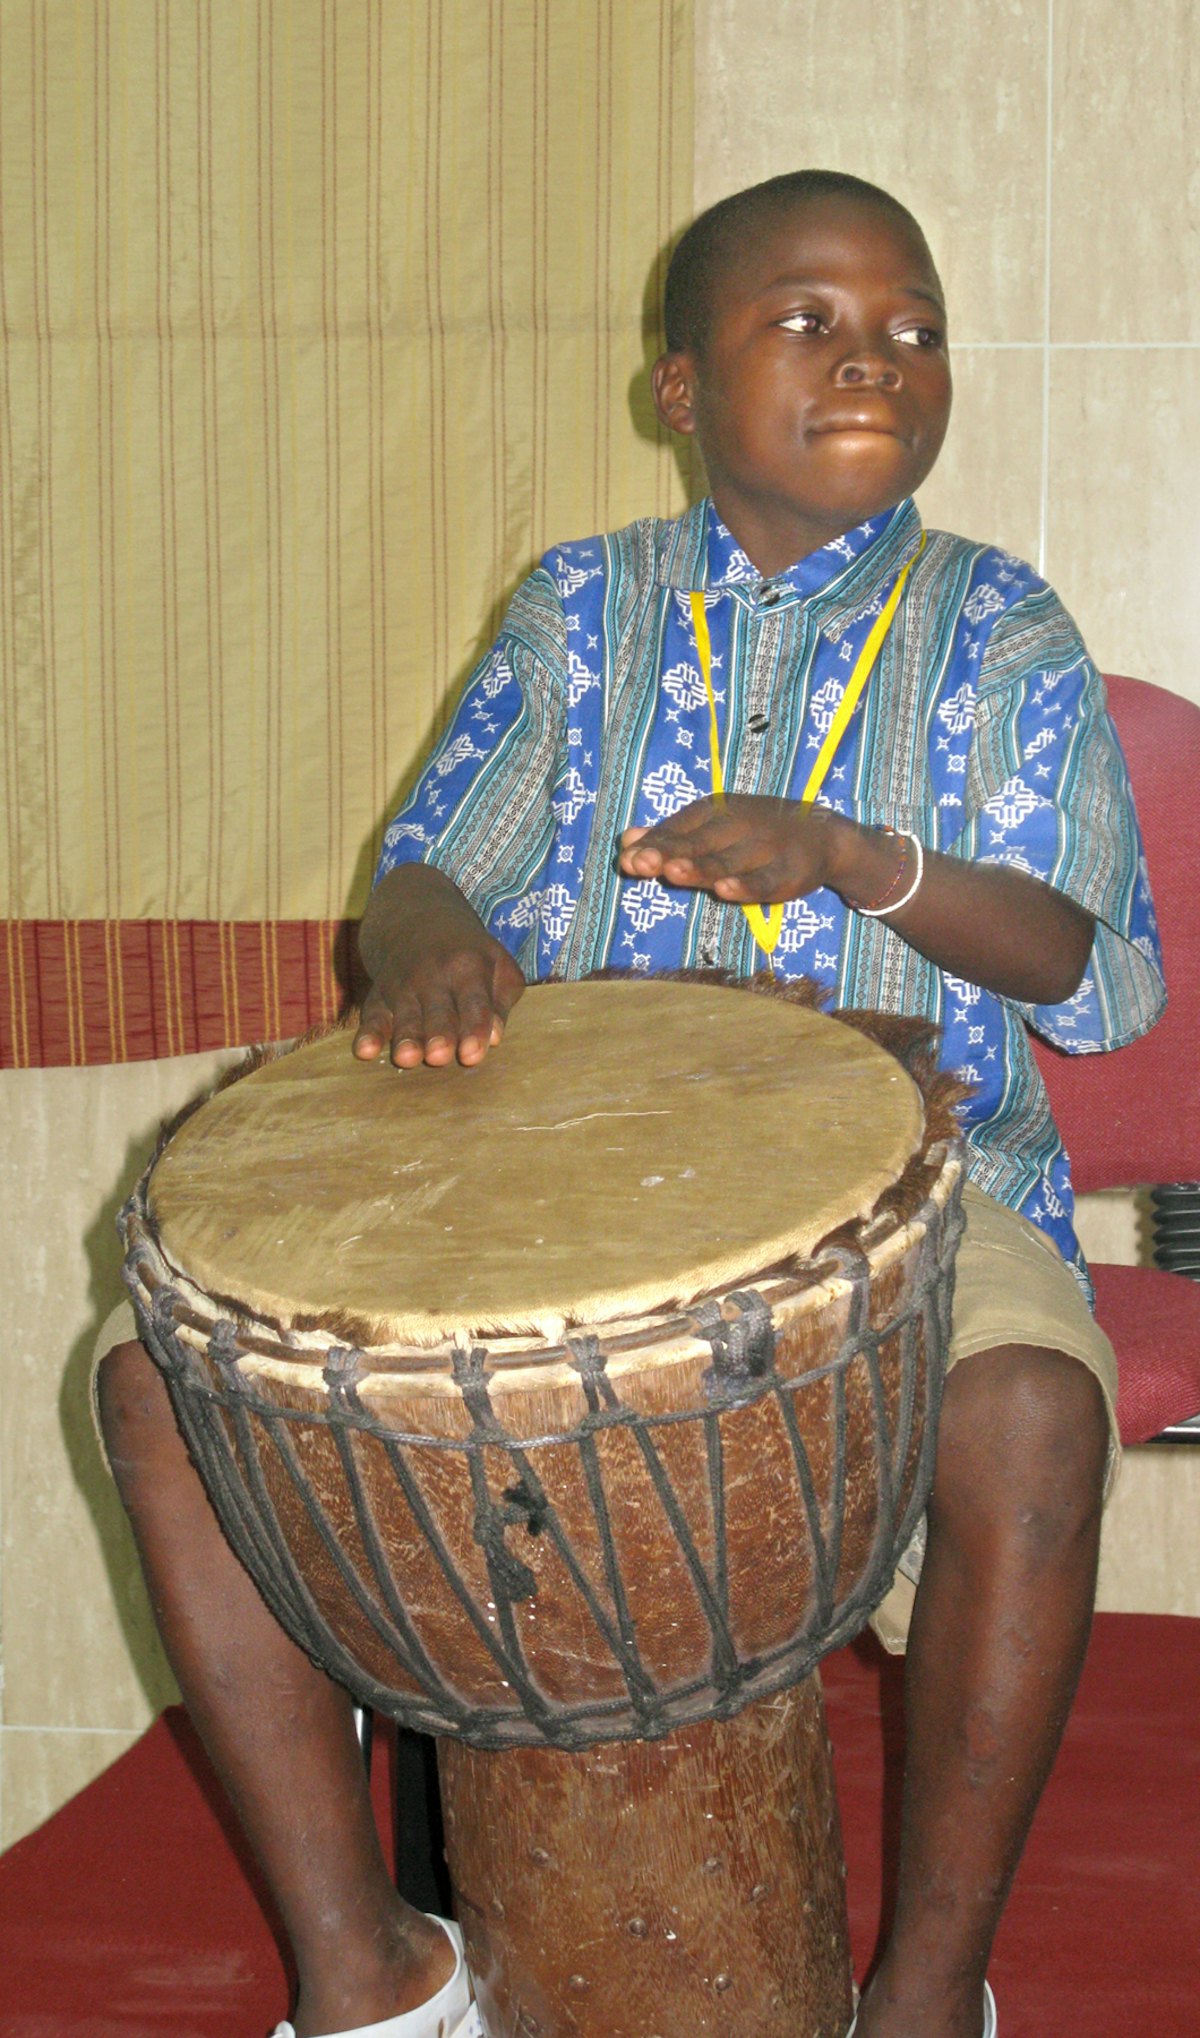 Each of the 41 conferences in the current series provides opportunity for consultation and celebration. This young drummer performed in Abidjan.